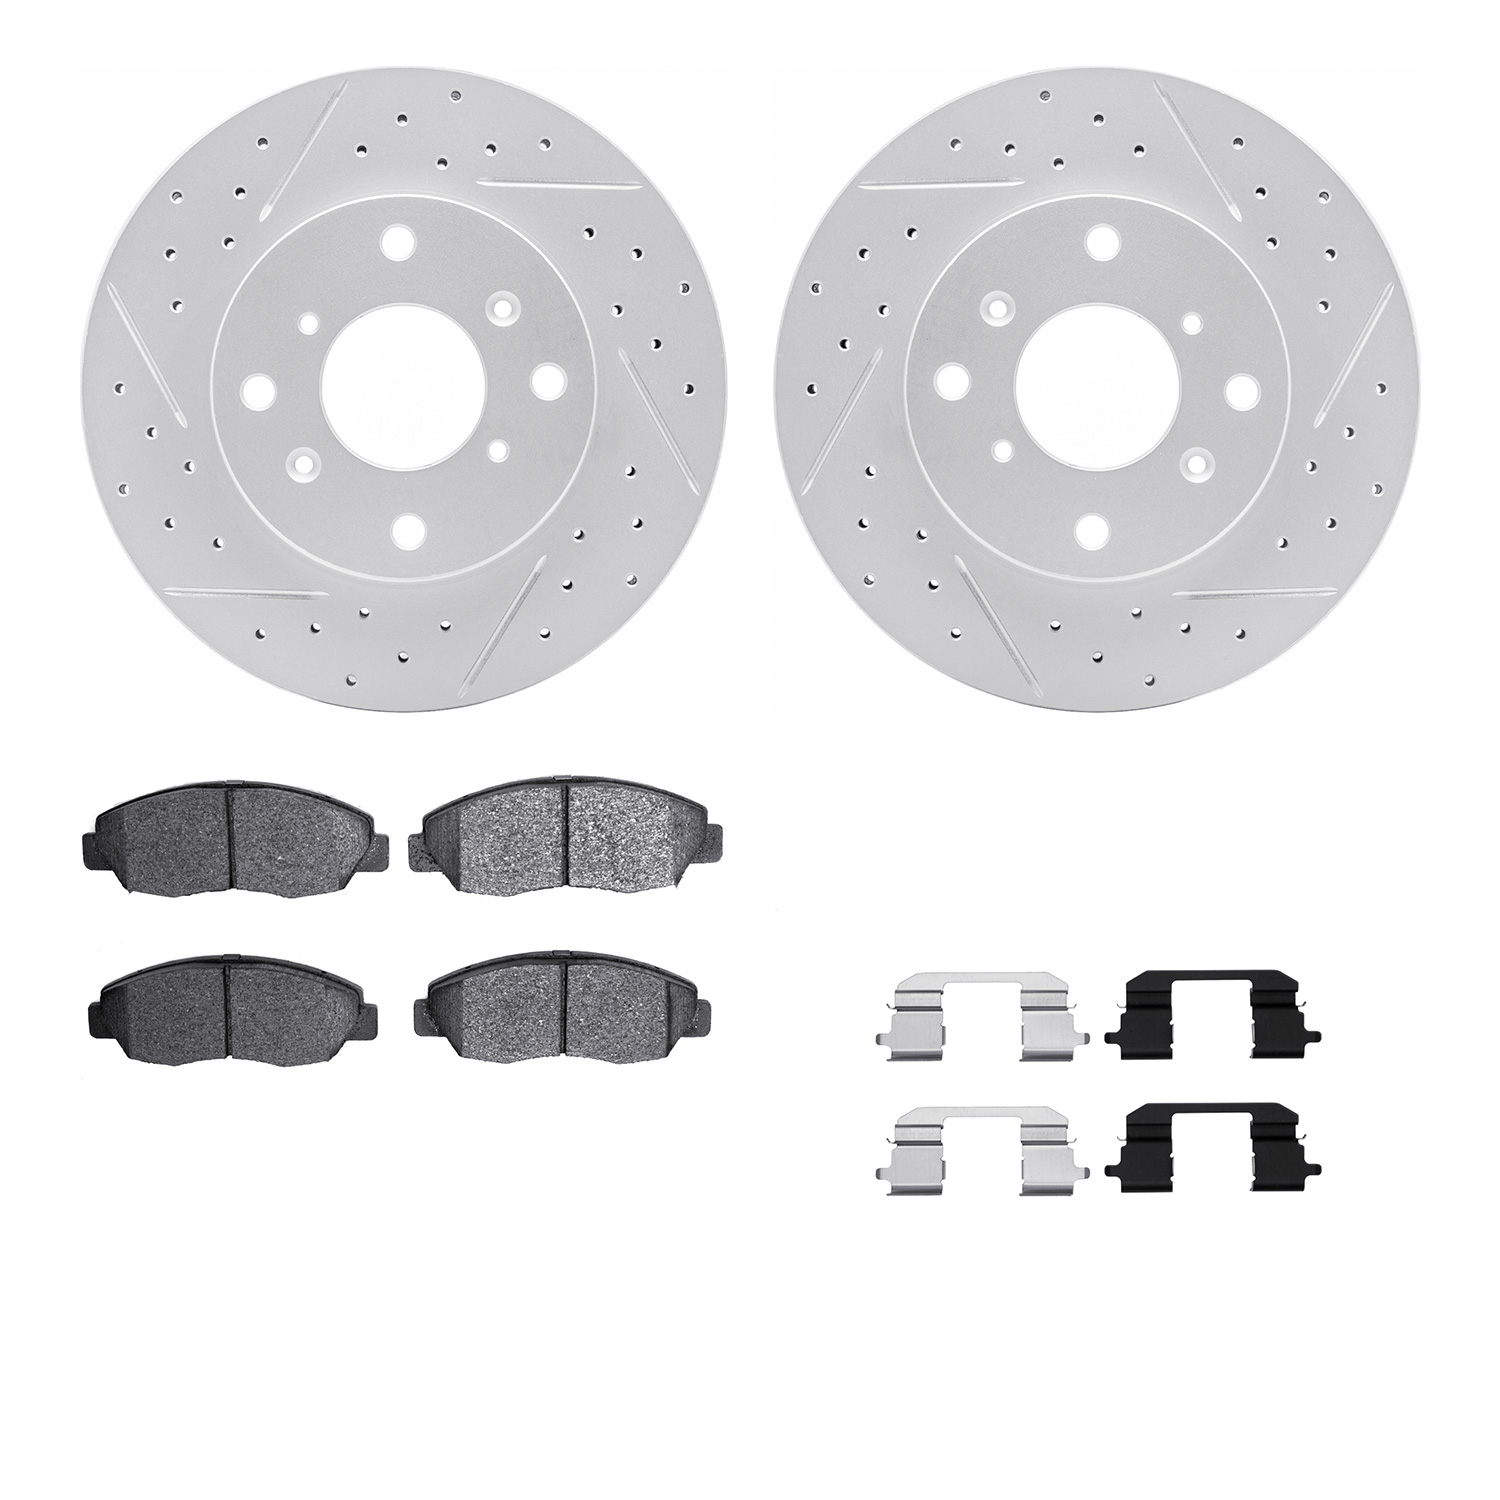 2512-59020 Geoperformance Drilled/Slotted Rotors w/5000 Advanced Brake Pads Kit & Hardware, 1998-2002 Acura/Honda, Position: Fro